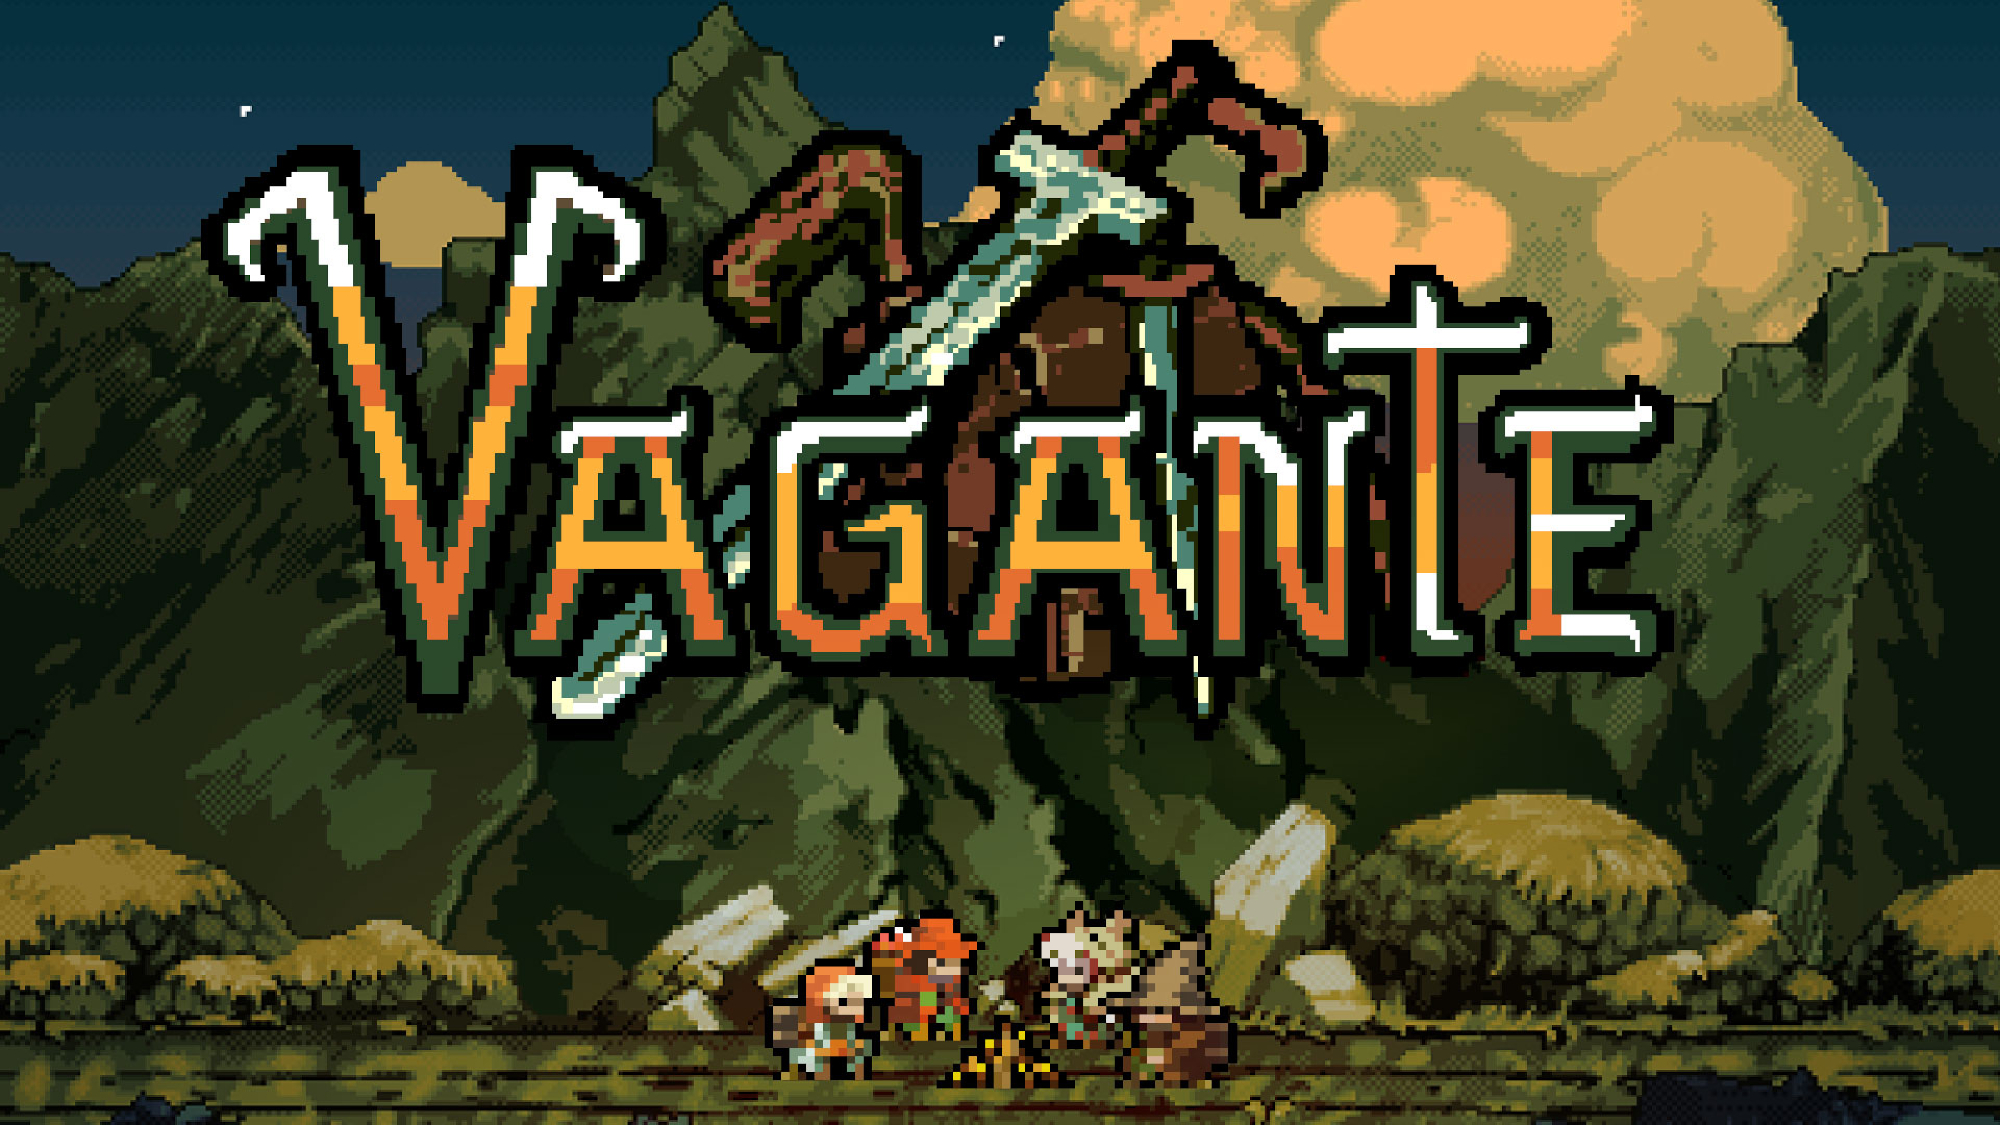 combat-focused-roguelite-vagante-launches-on-consoles-in-january